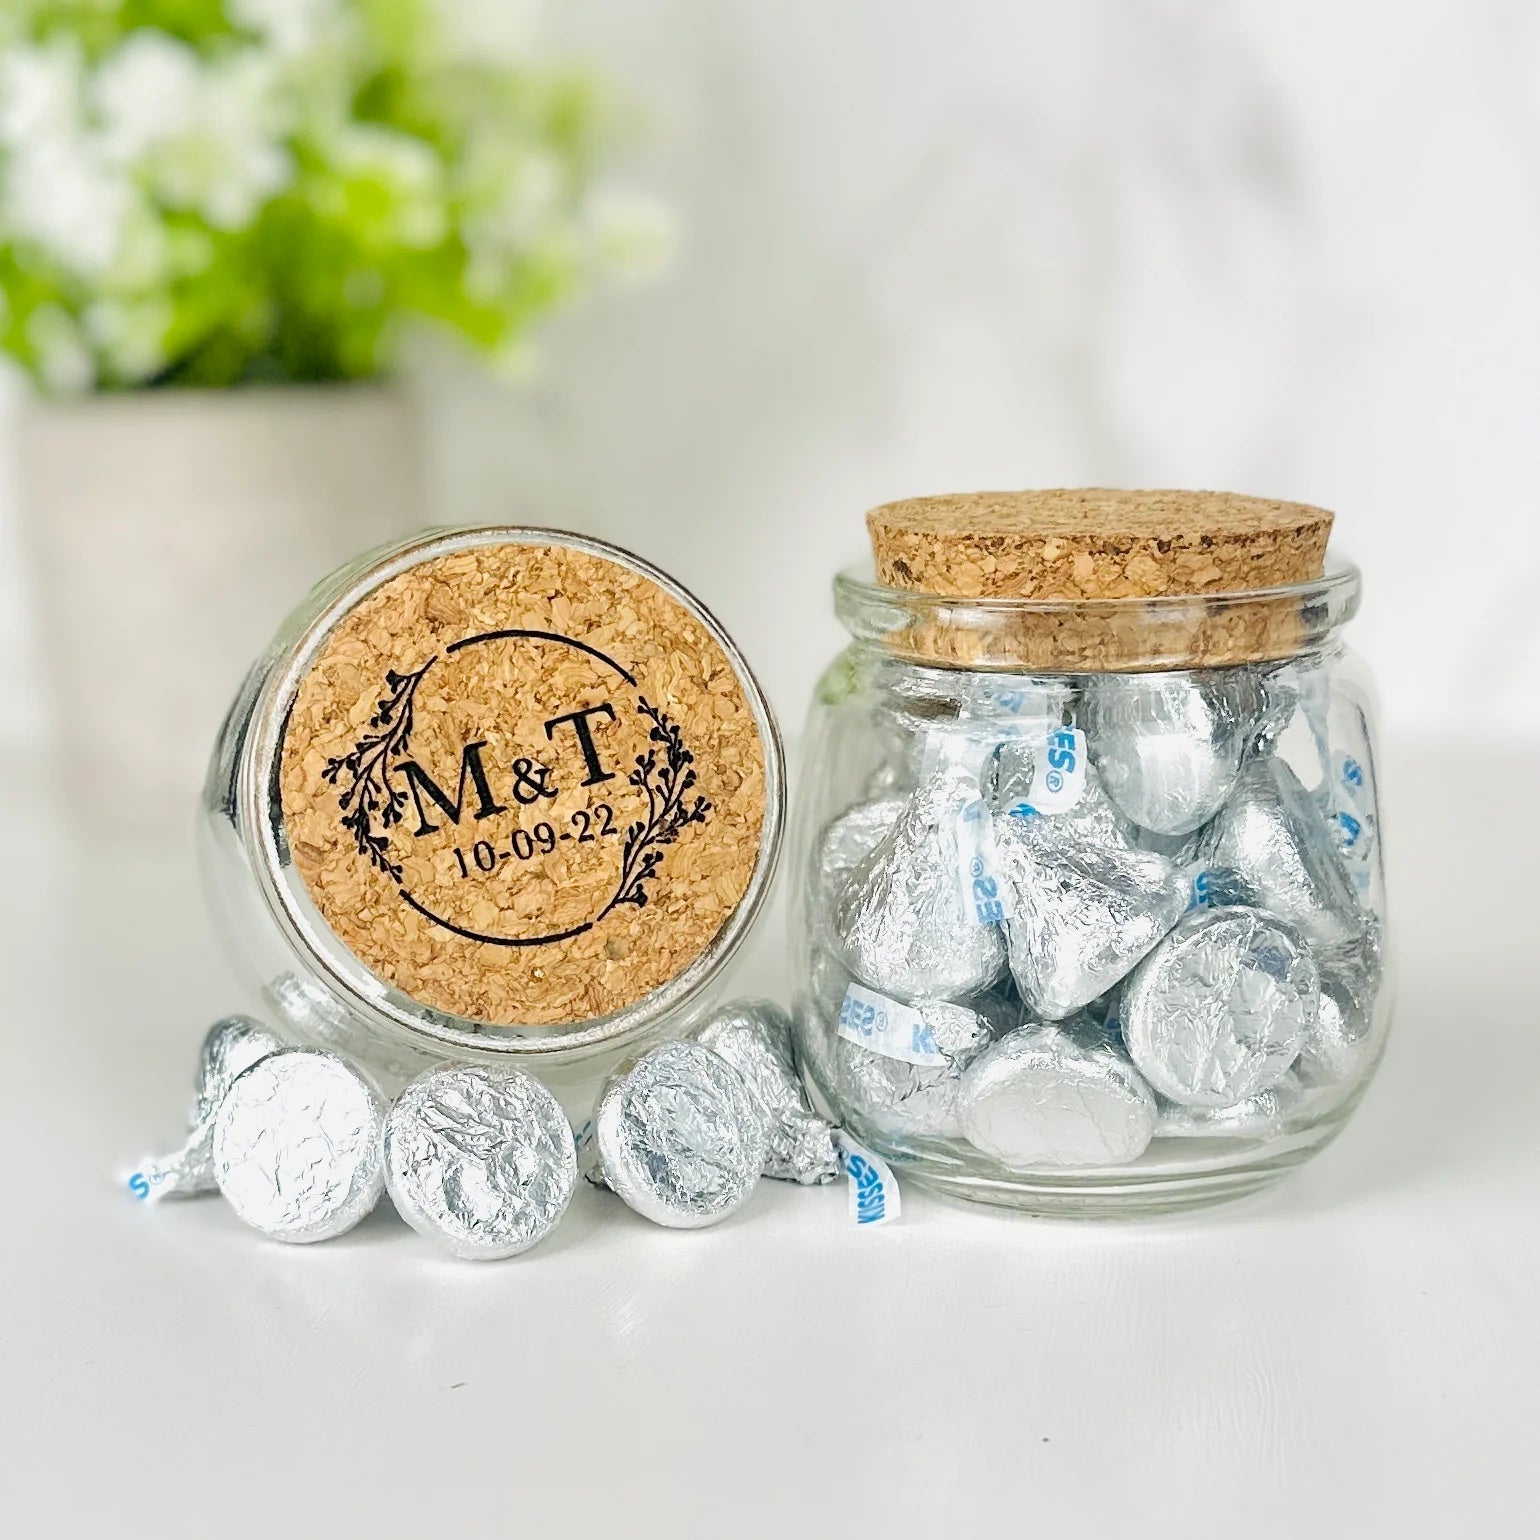 https://www.foreverweddingfavors.com/cdn/shop/articles/indulge-in-love-with-these-27-decadent-chocolate-wedding-favors-430835_1540x.webp?v=1686752457